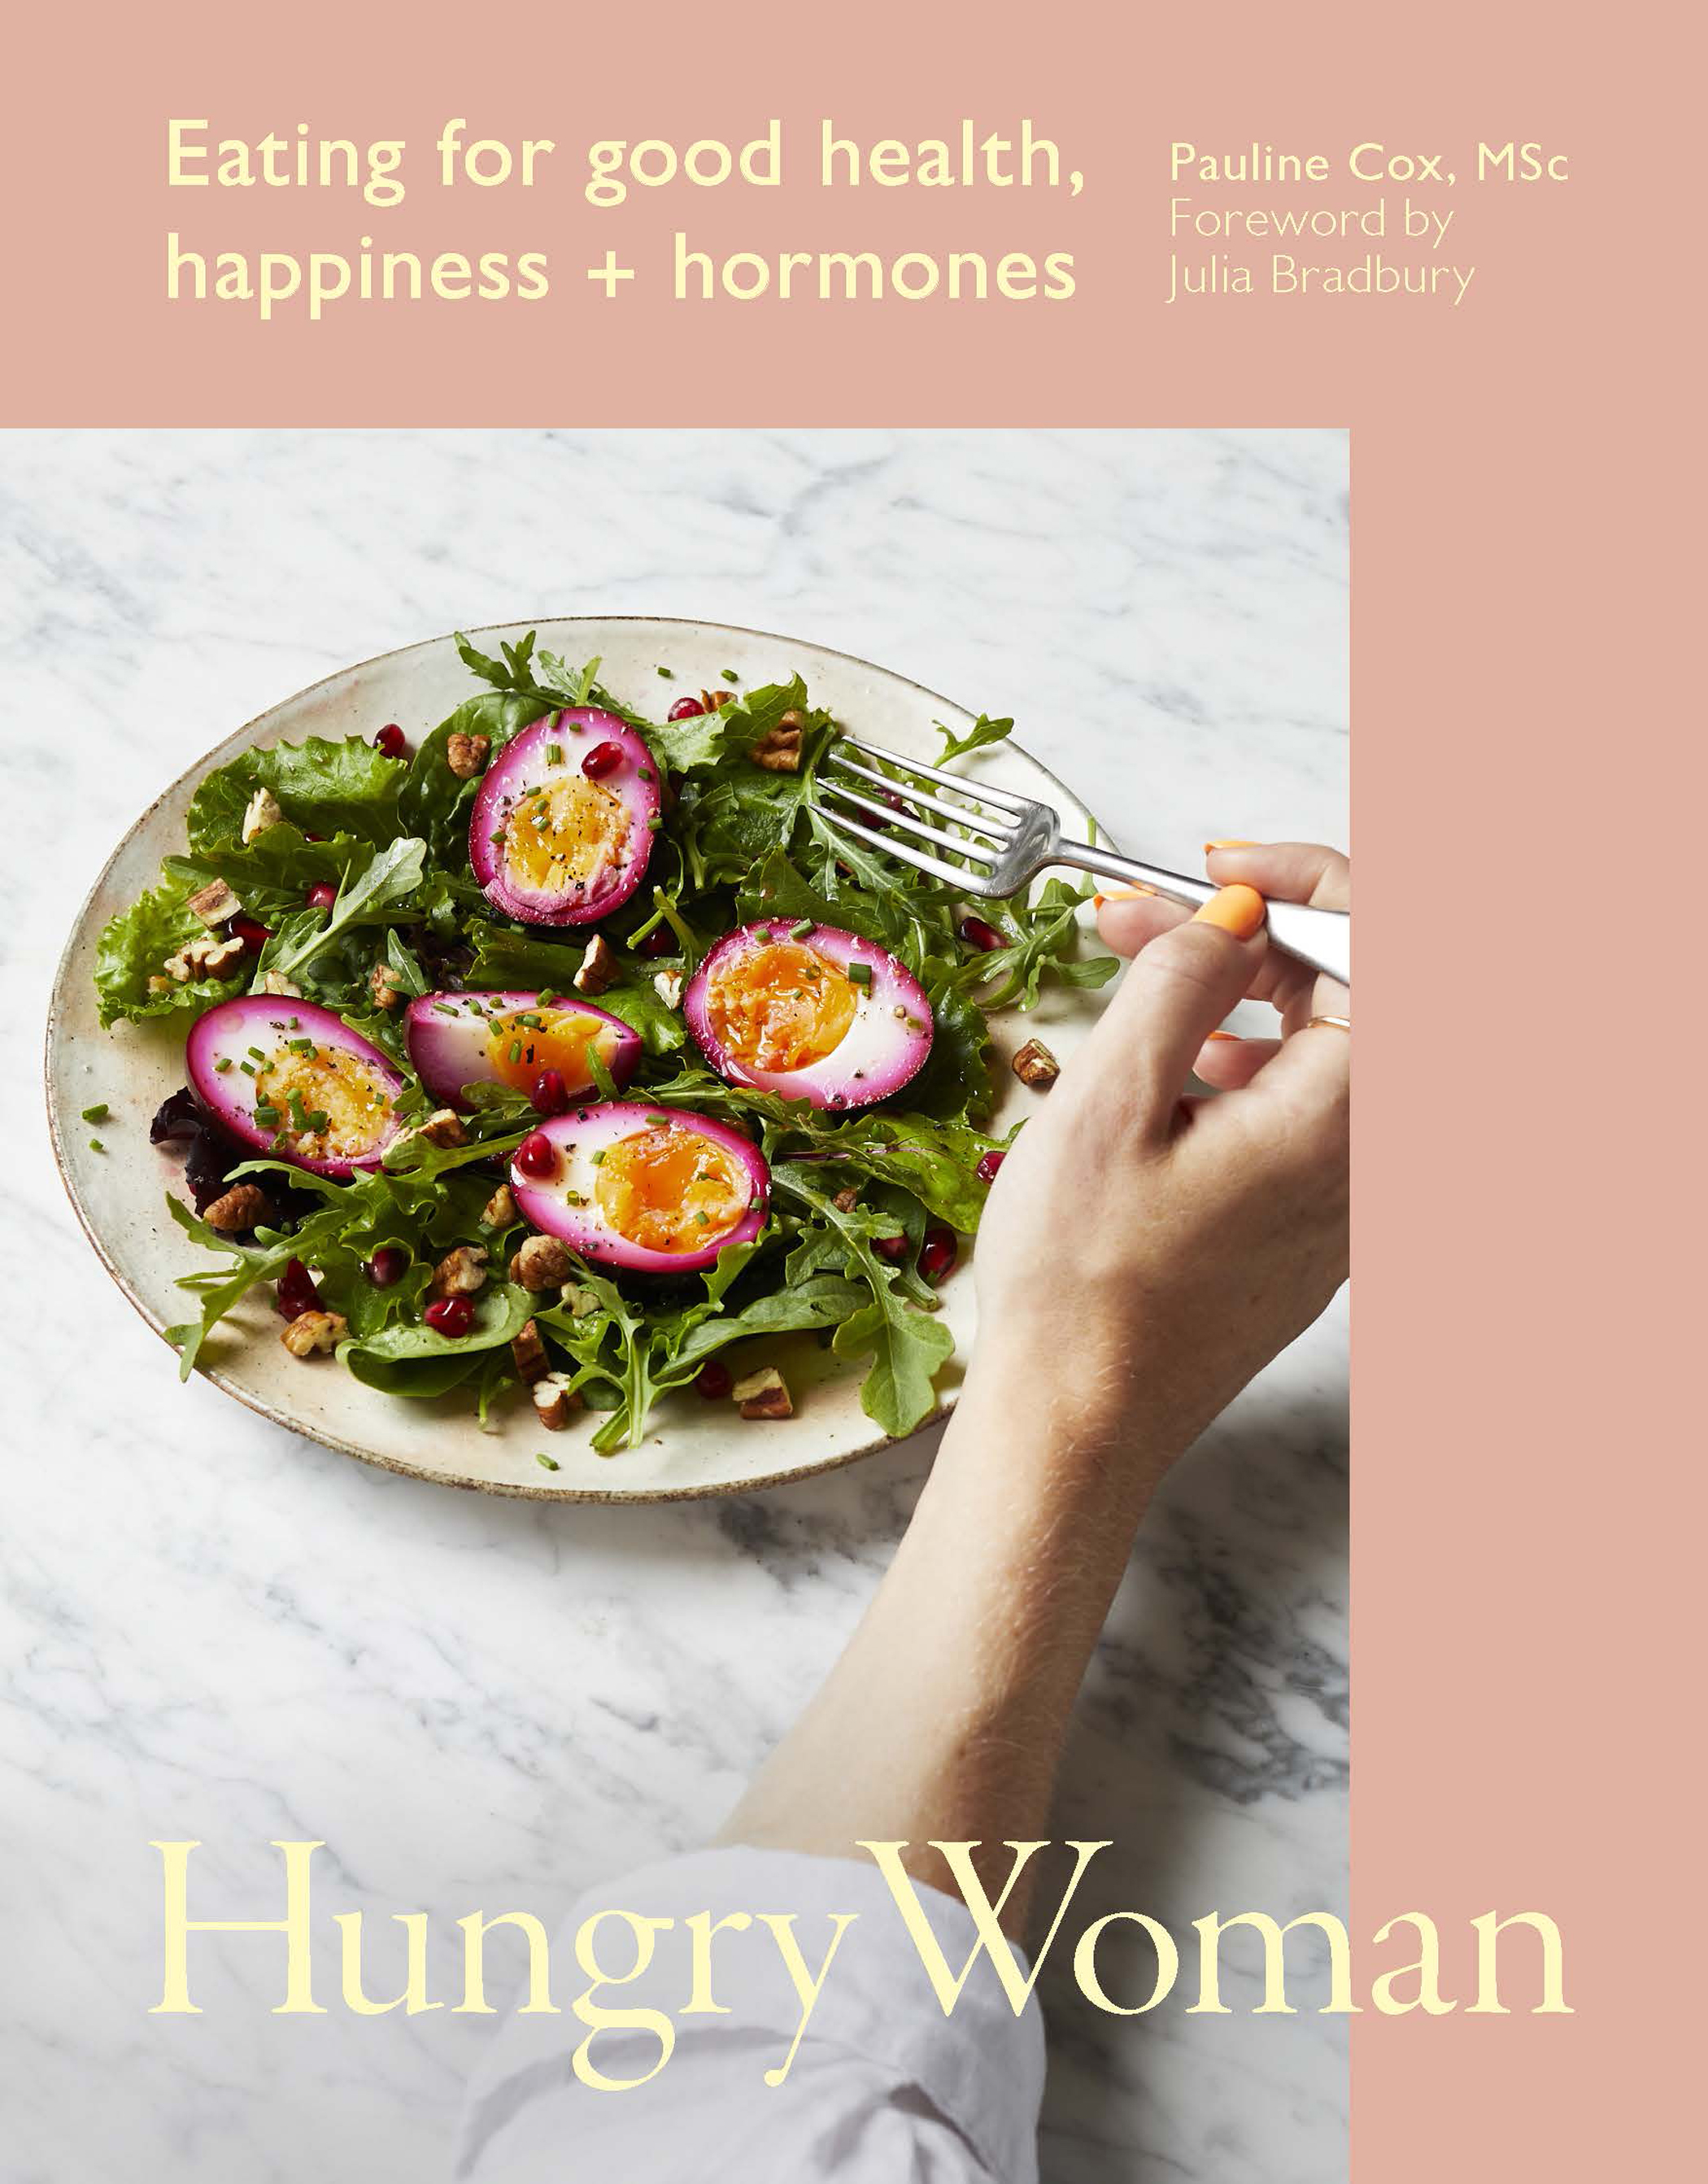 Hungry Woman by Pauline Cox